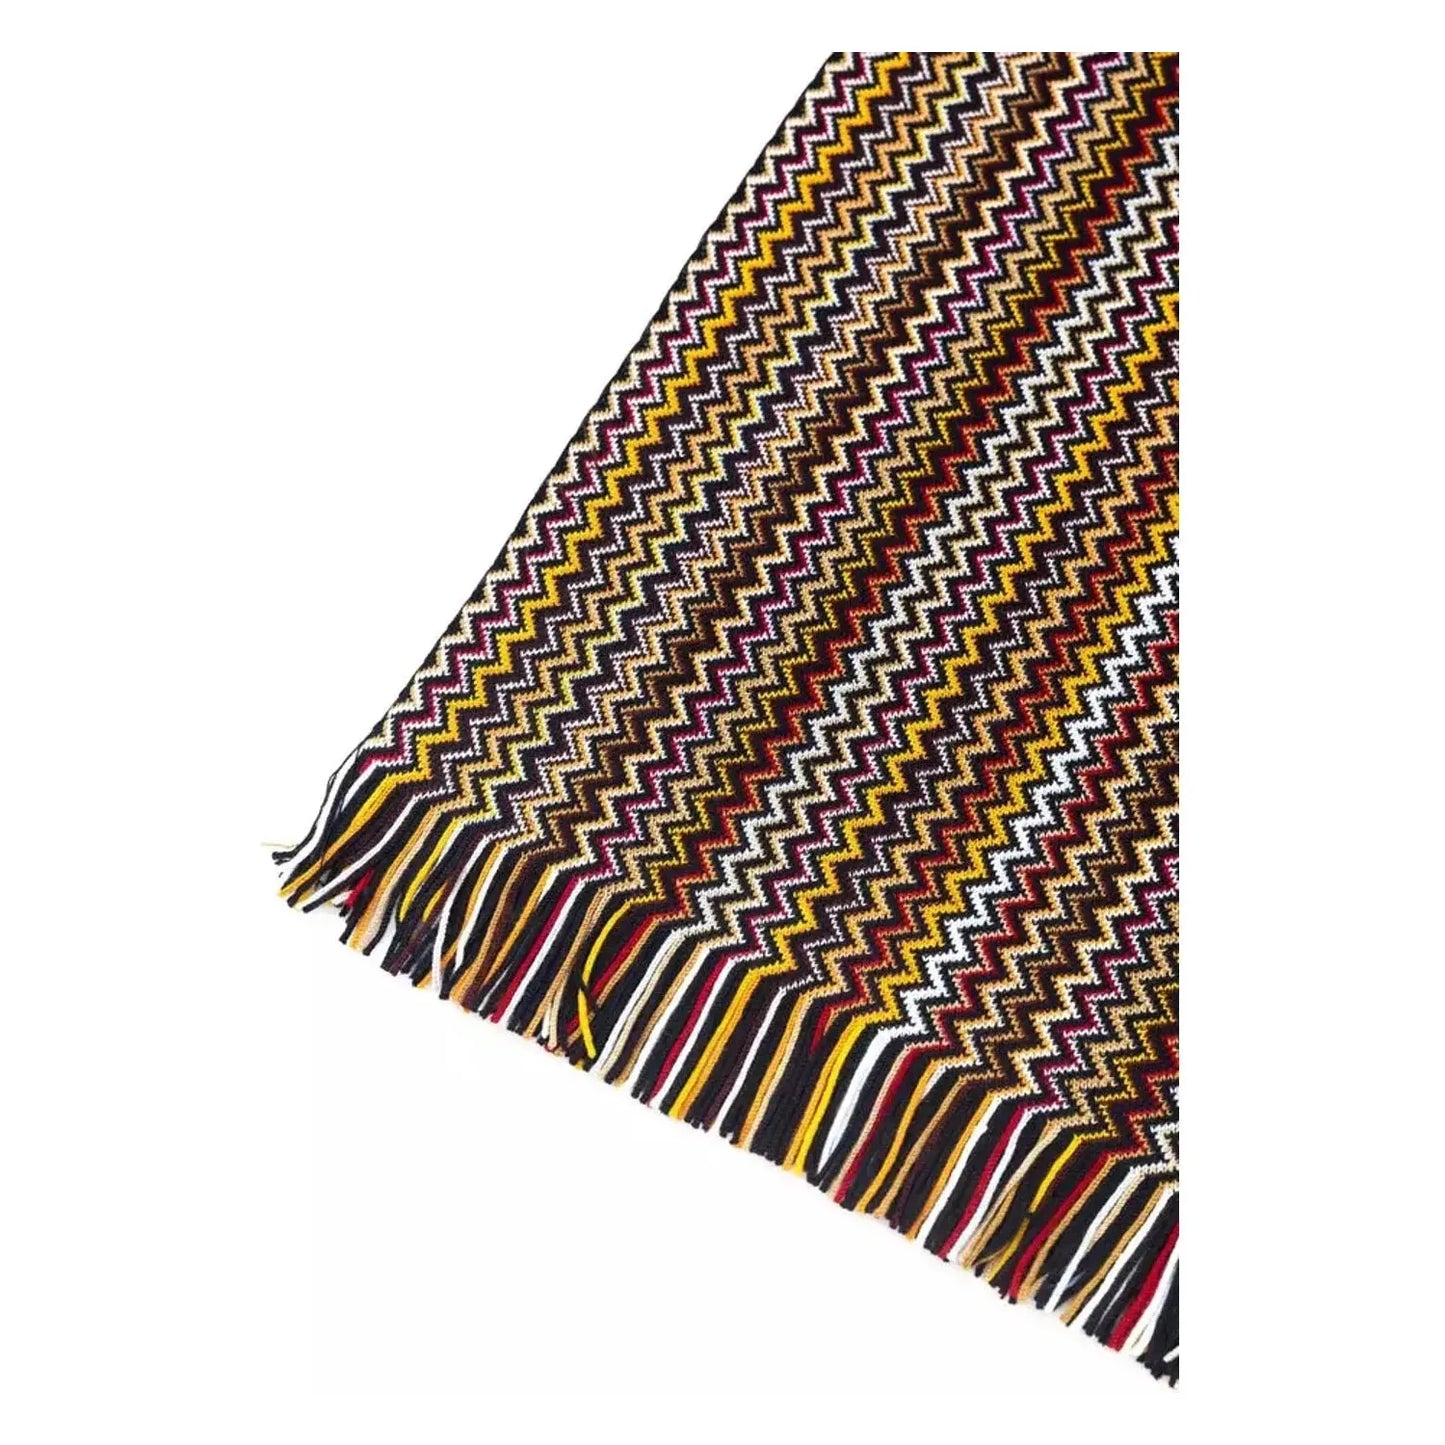 Missoni Vibrant Geometric Patterned Fringed Scarf multicolor-wool-scarf-1 product-22227-933821681-24-7a5d7dbf-d48.webp